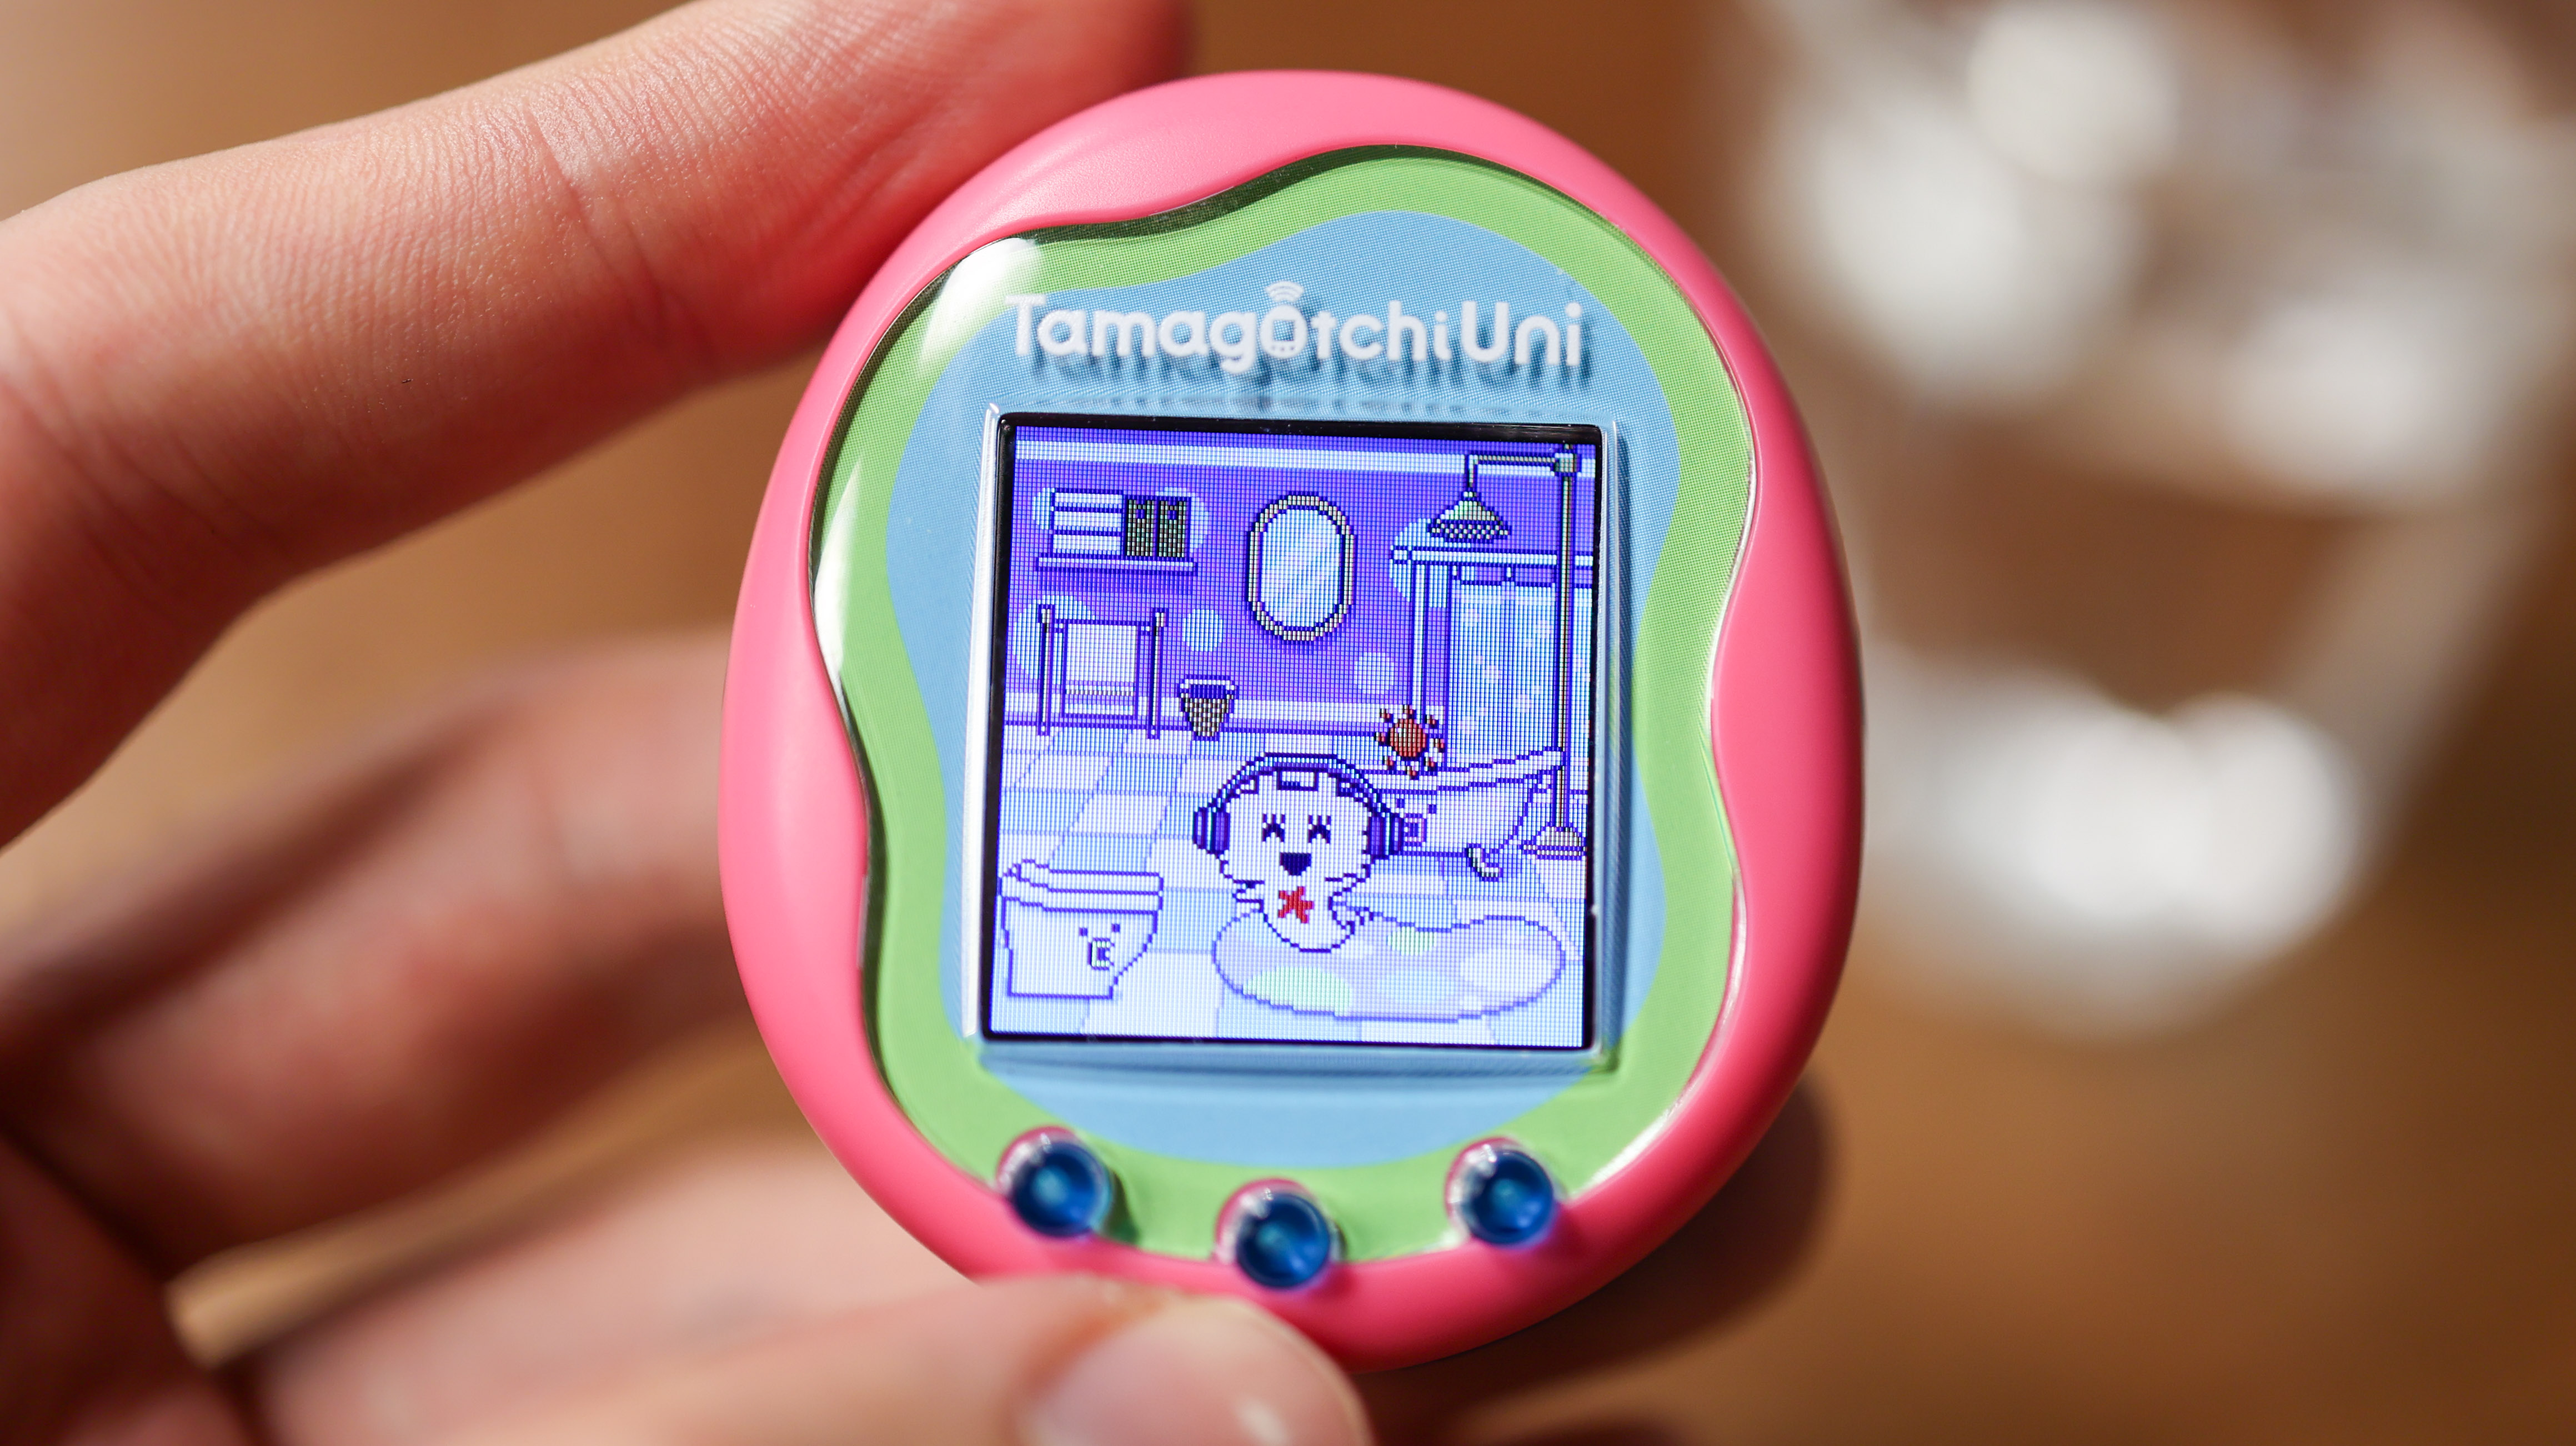 Everything You Want To Know About the Tamagotchi Pix! – Tamagotchi